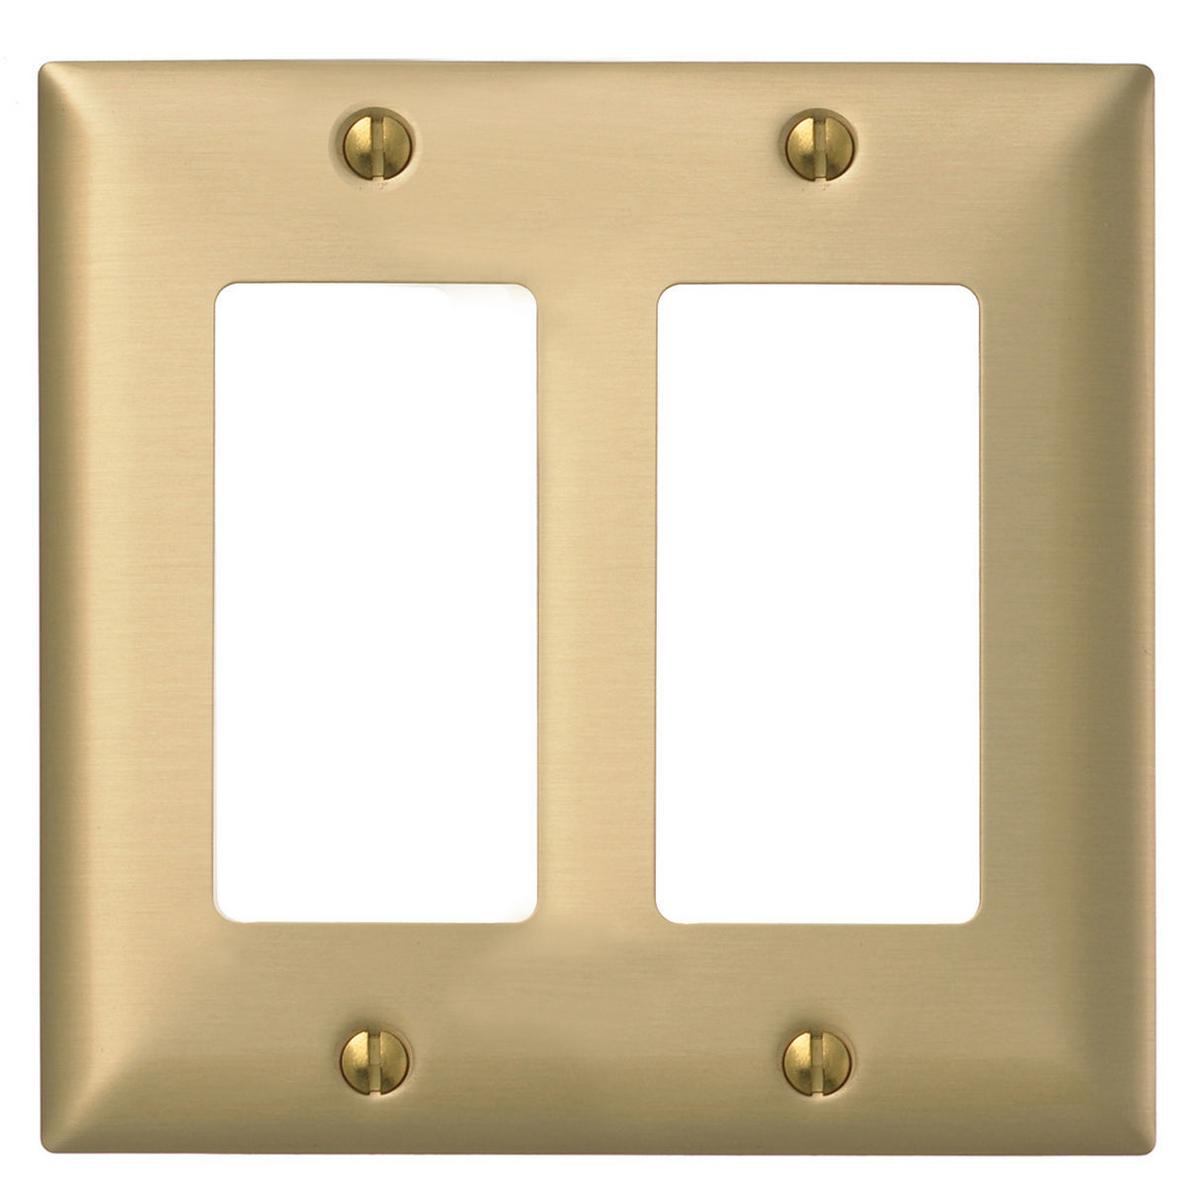 Hubbell SBP262 Wallplates and Boxes, Metallic Plates, 2- Gang, 2) Decorator Openings, Standard Size, Brass Plated Steel  ; Provides a plush appearance with the durability of metal ; Finish is lacquer coated to inhibit oxidation ; Protective plastic film helps to prevent